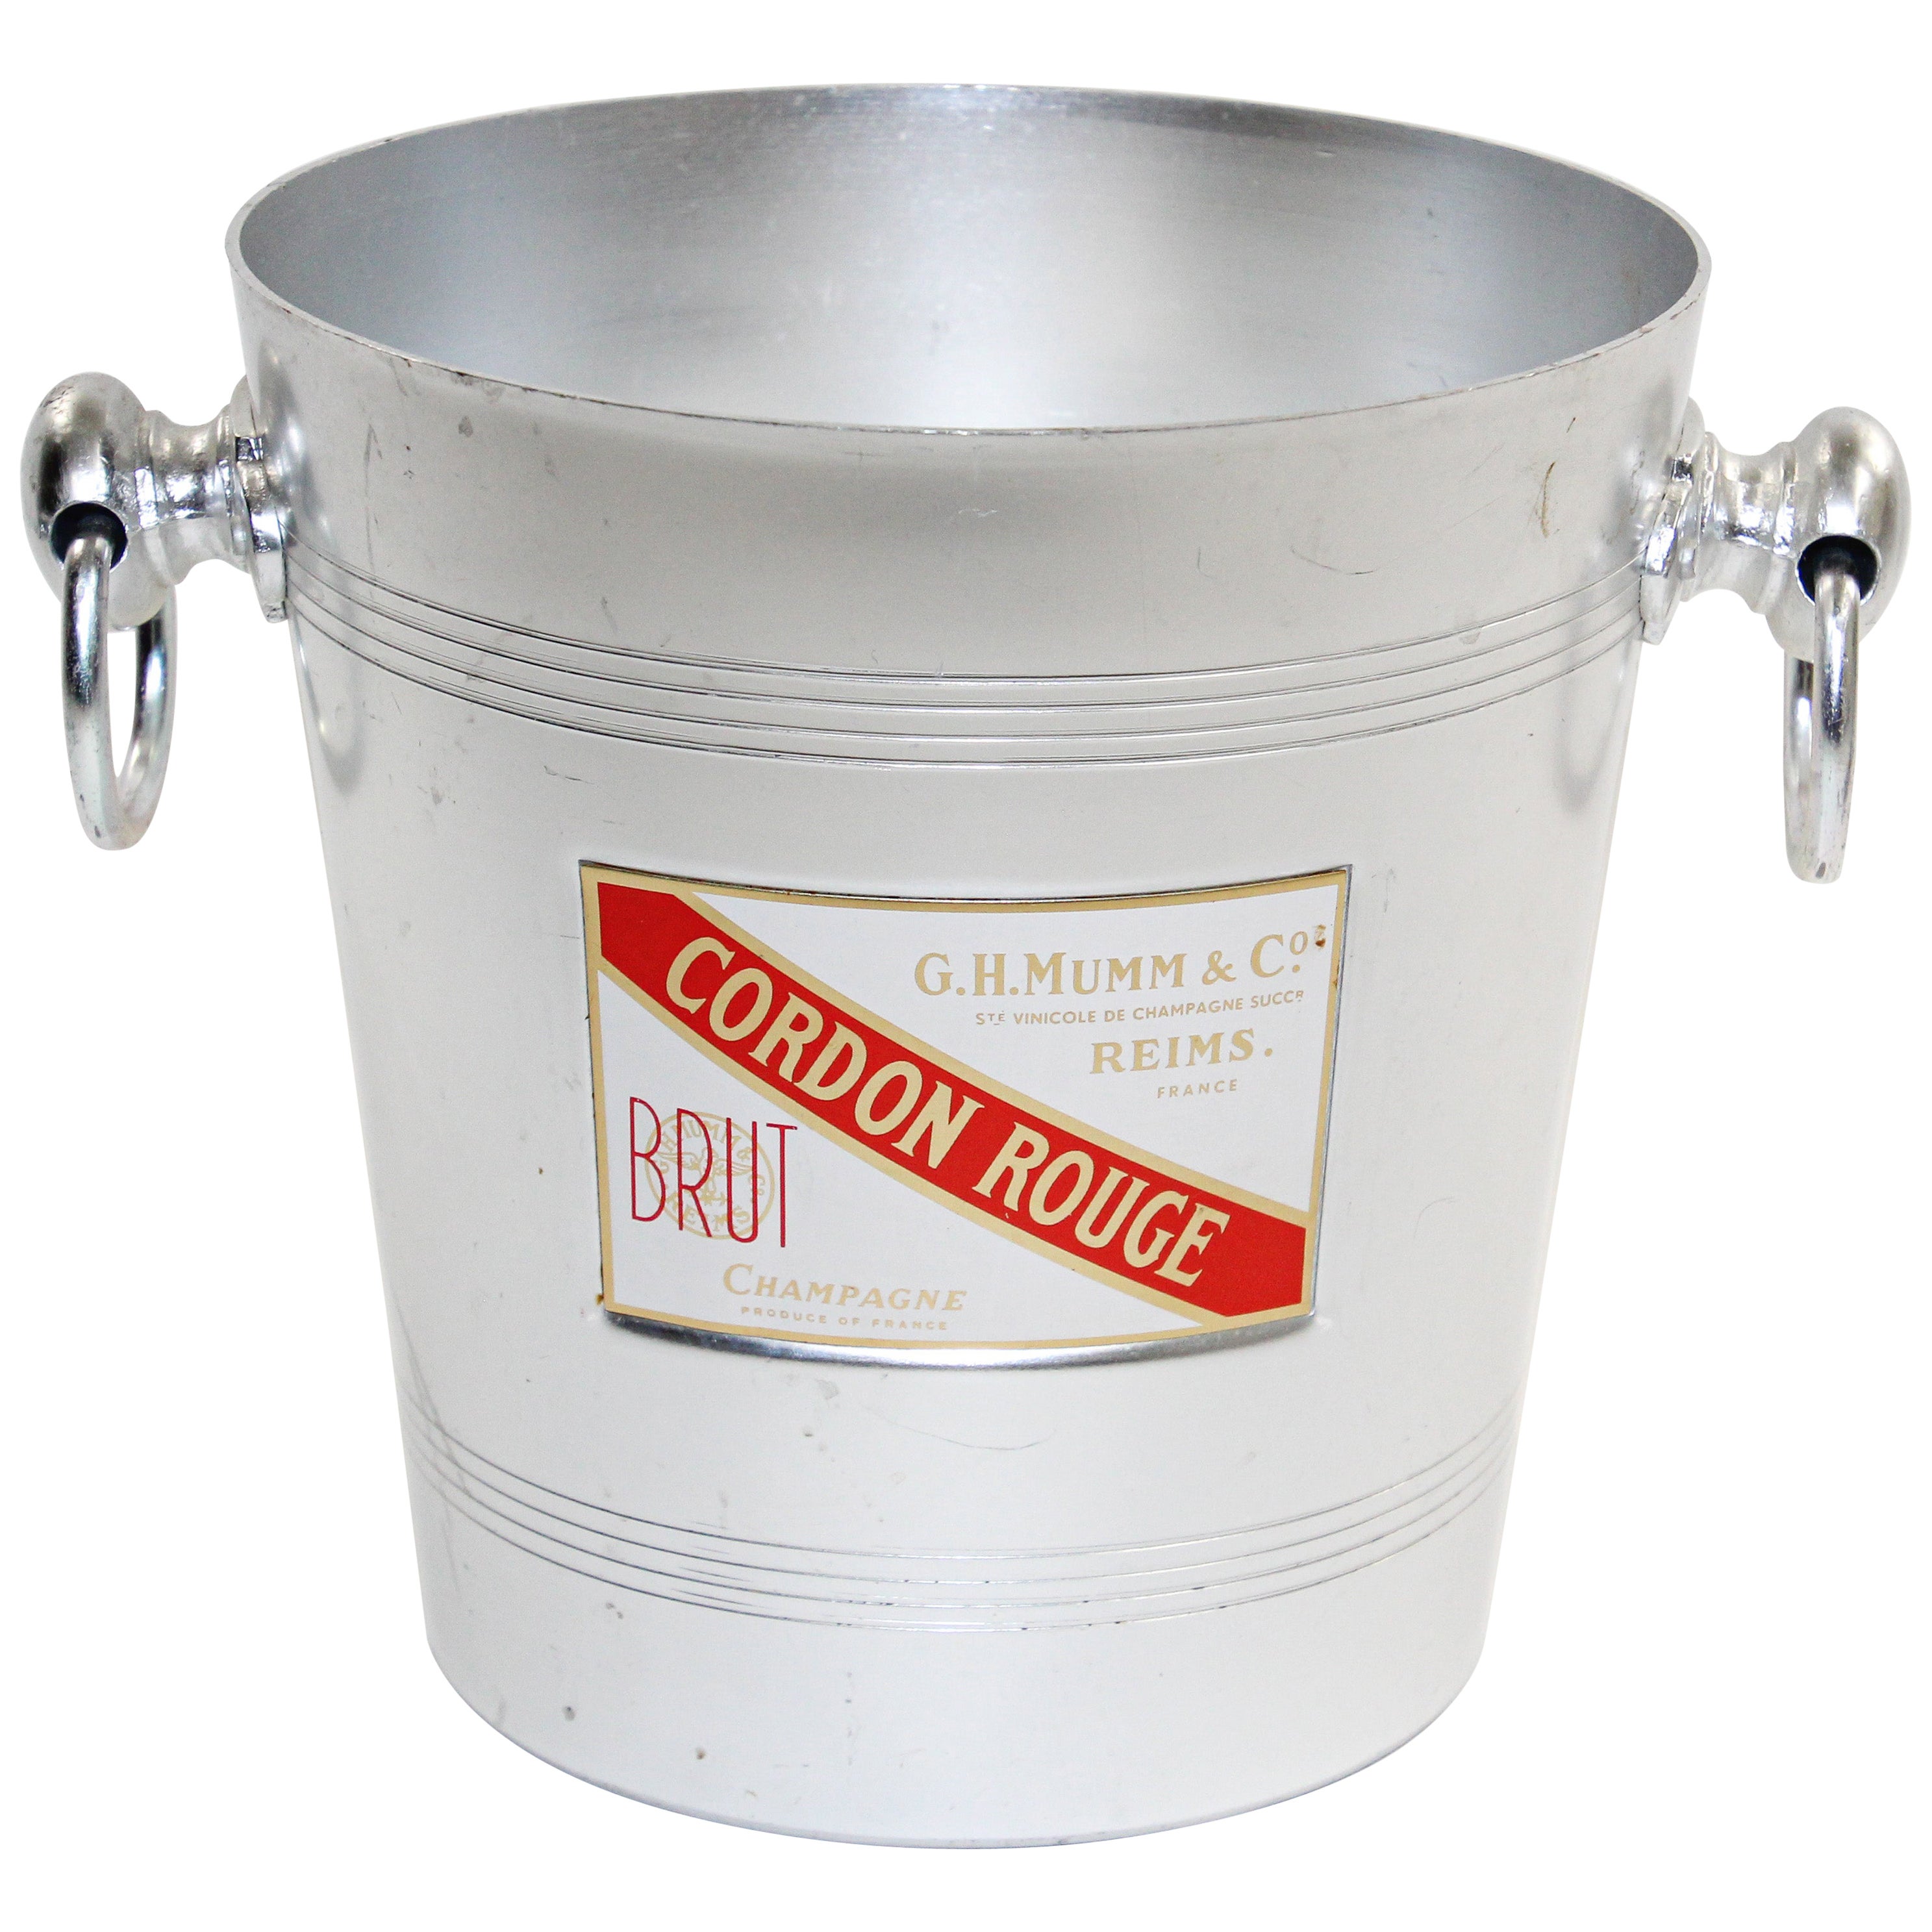 Vintage French G H Mumm Cordon Rouge Reims Champagne Ice Bucket Cooler For Sale